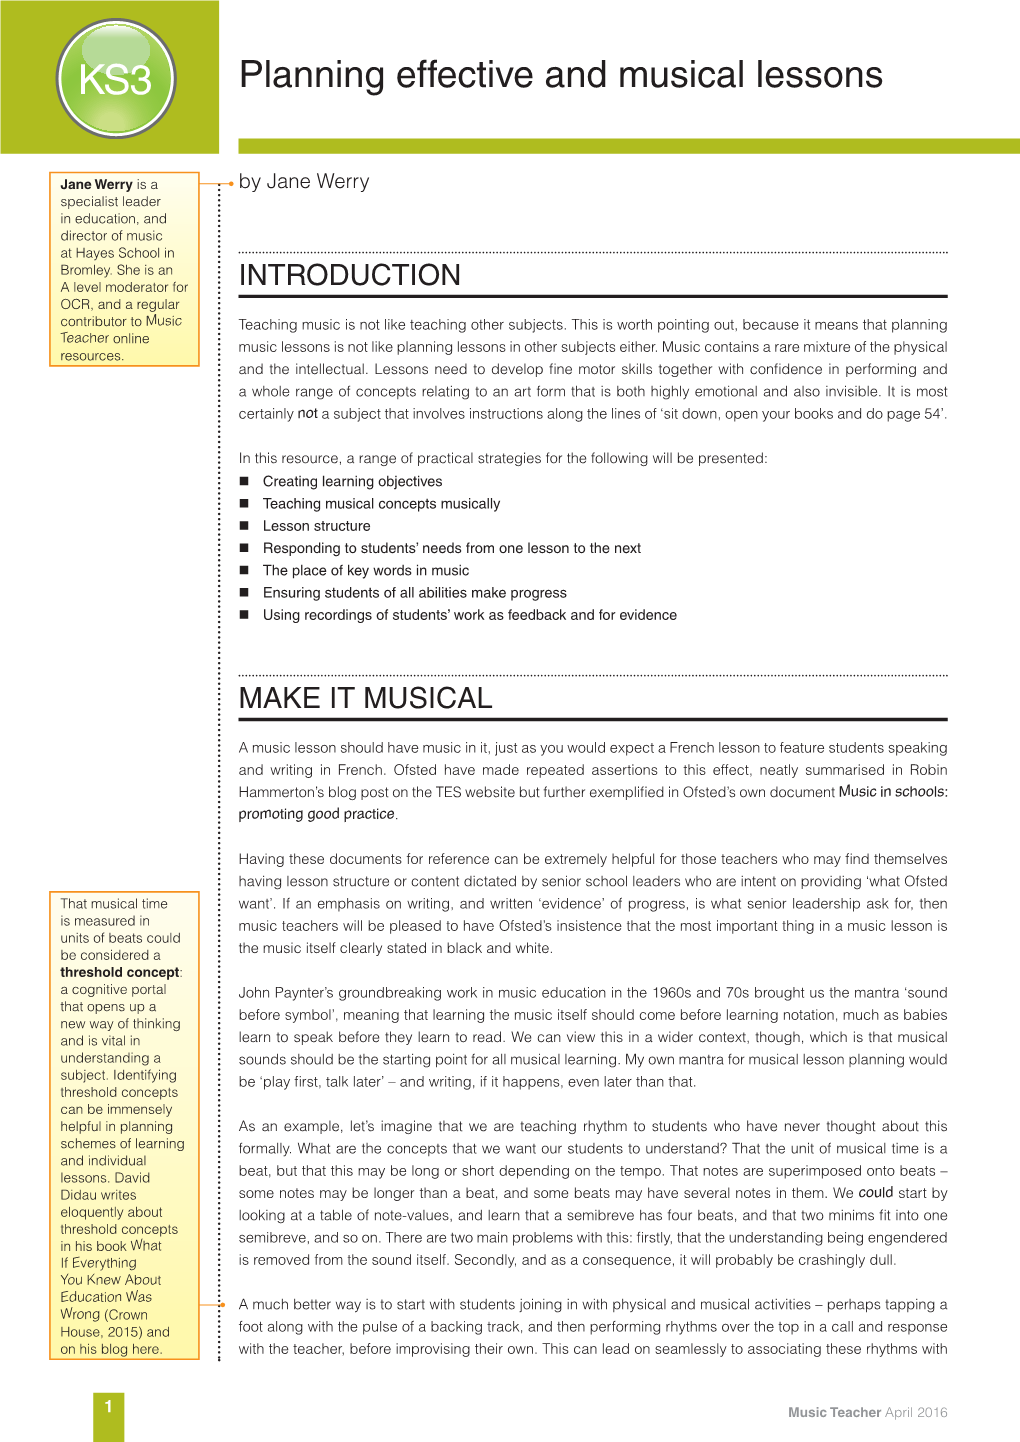 Planning Effective and Musical Lessons